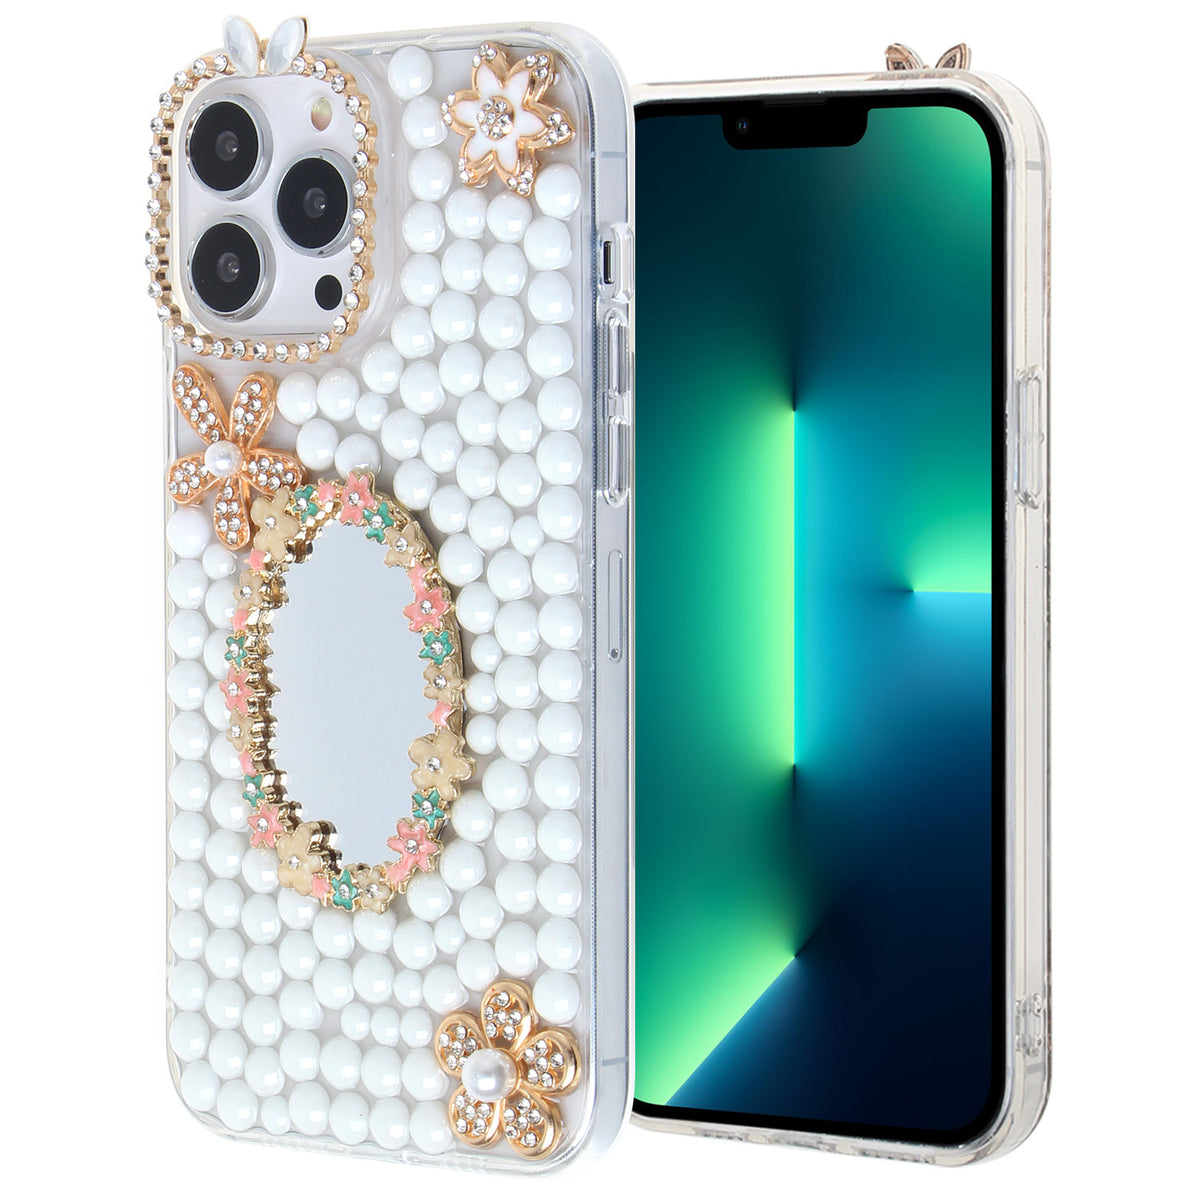 Iphone 11 (6.1Inch) White Pearl Diamond Case with Mirror